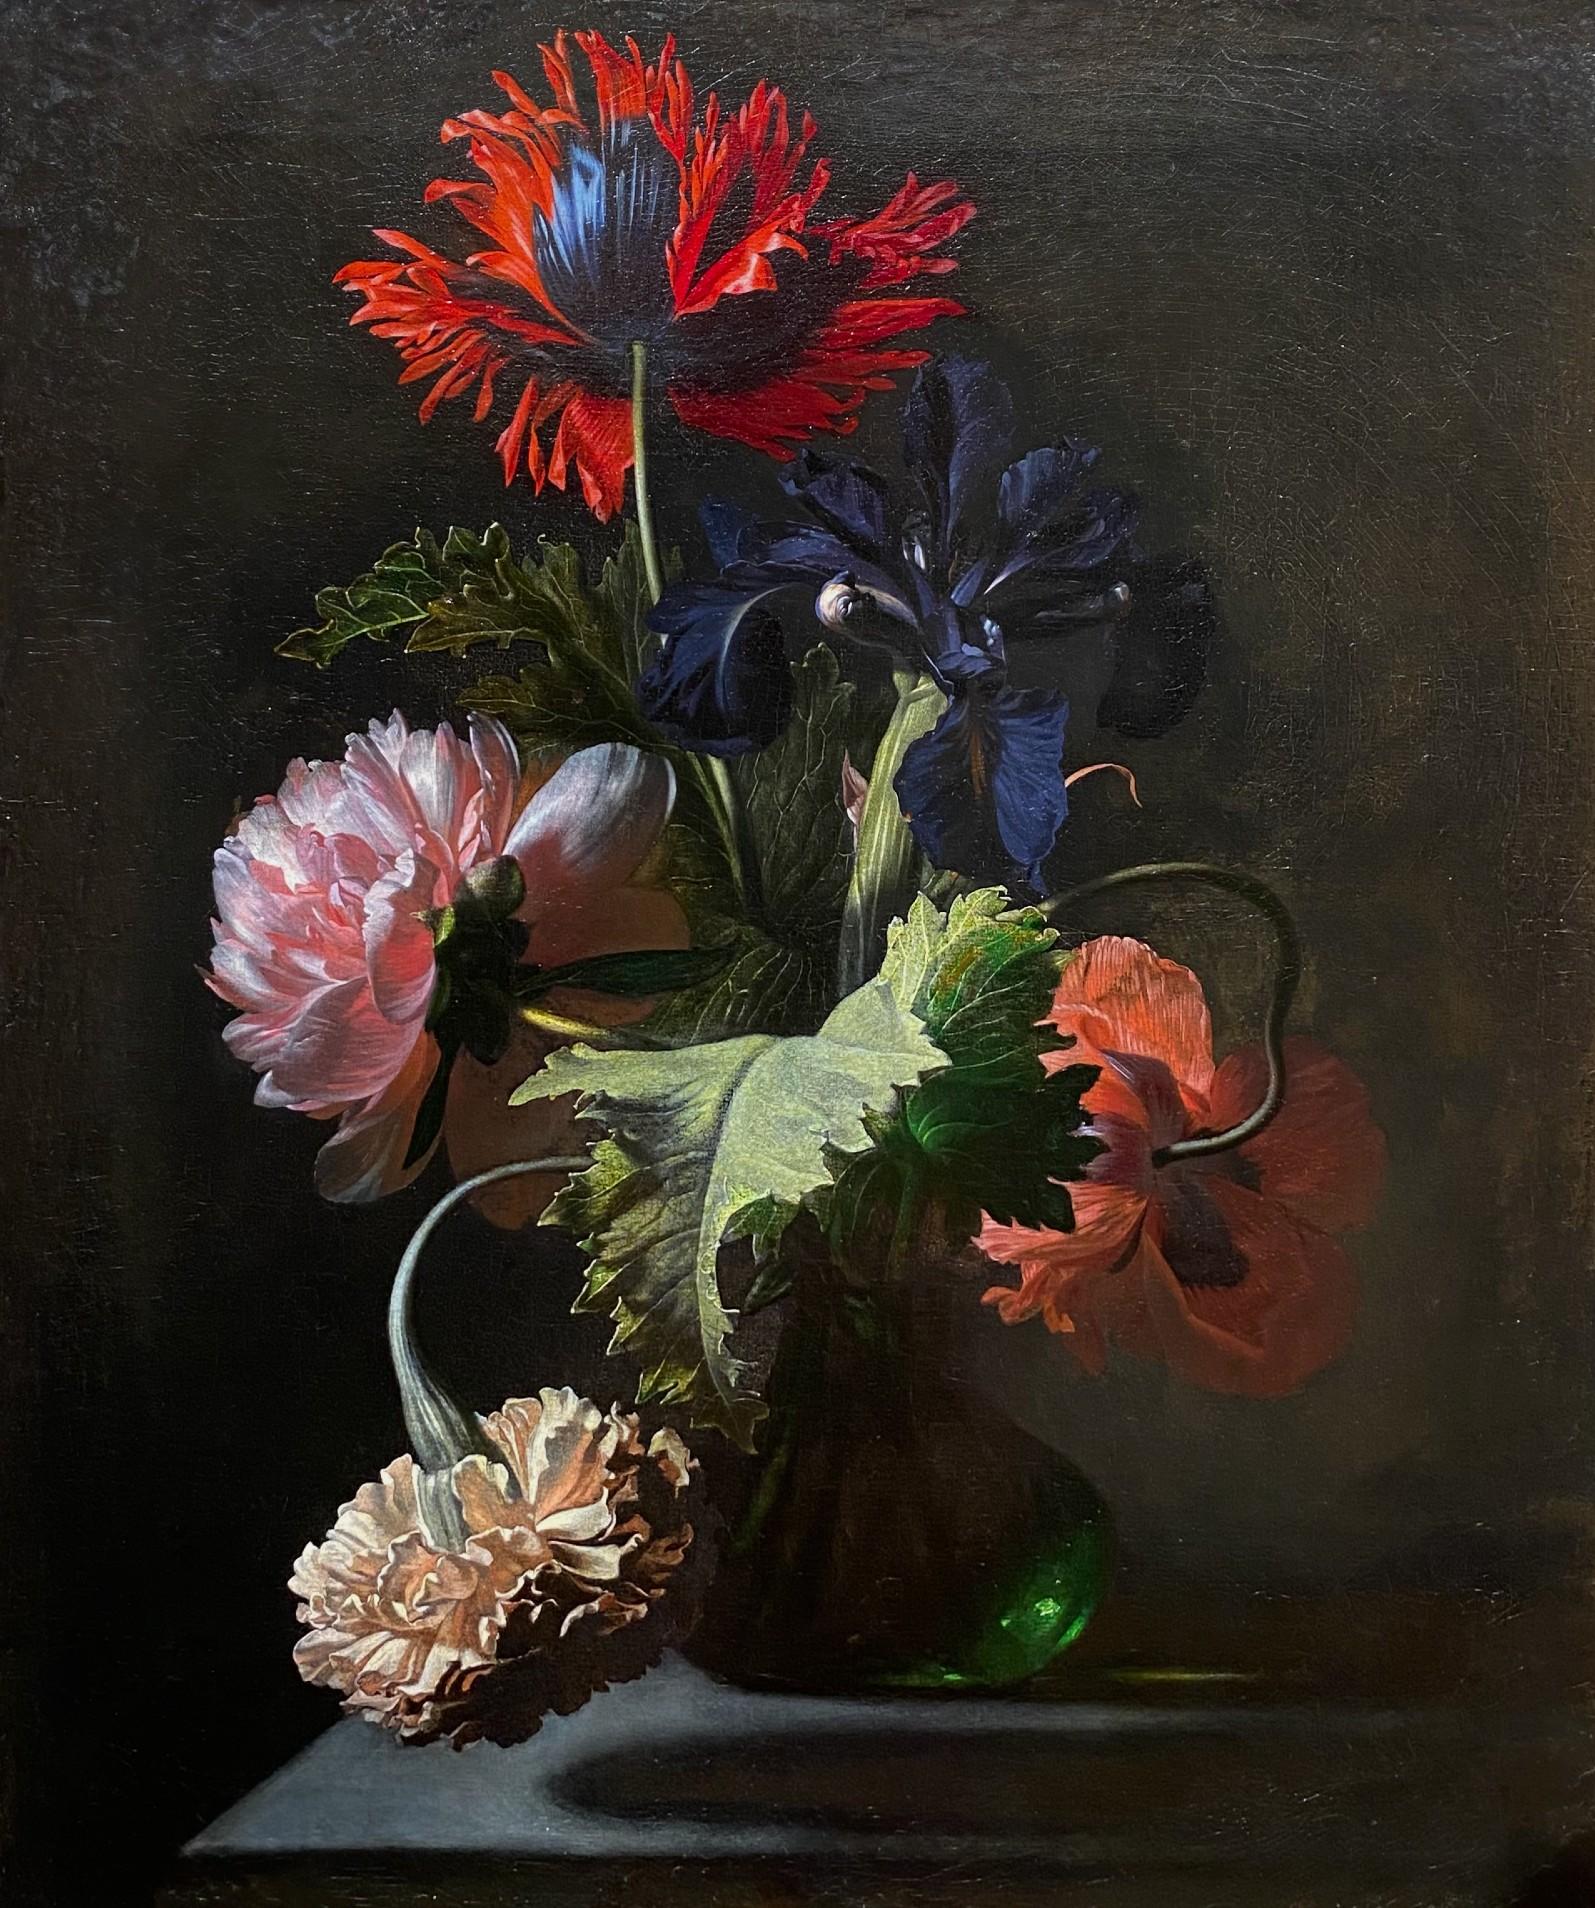 Still Life of a Poppy, Iris and Peonies in a Glass Vase - Painting by Simon Pietersz Verelst